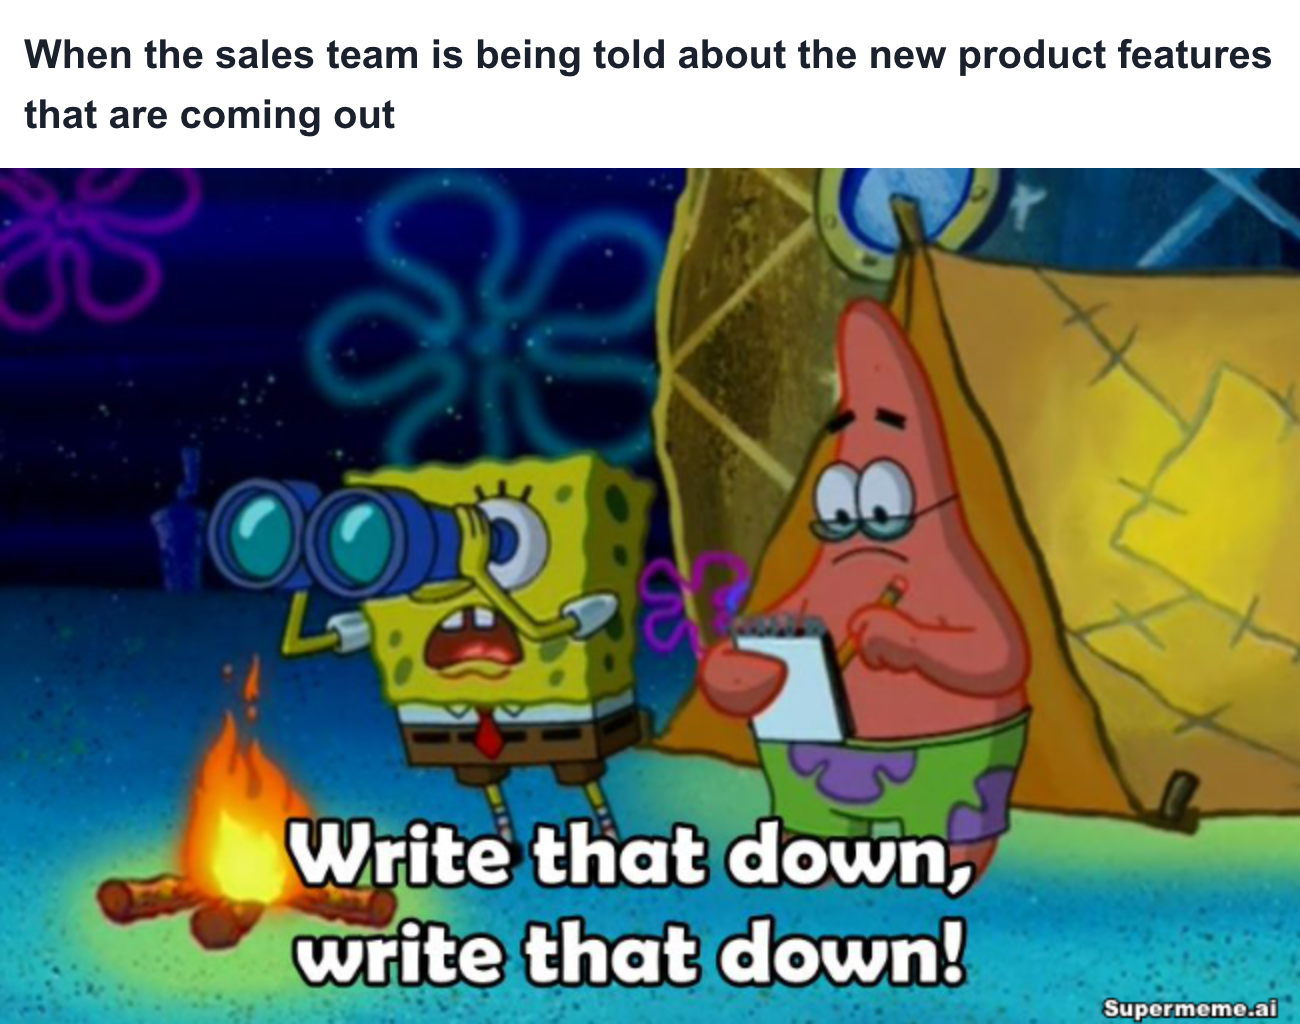 sales meme on product features